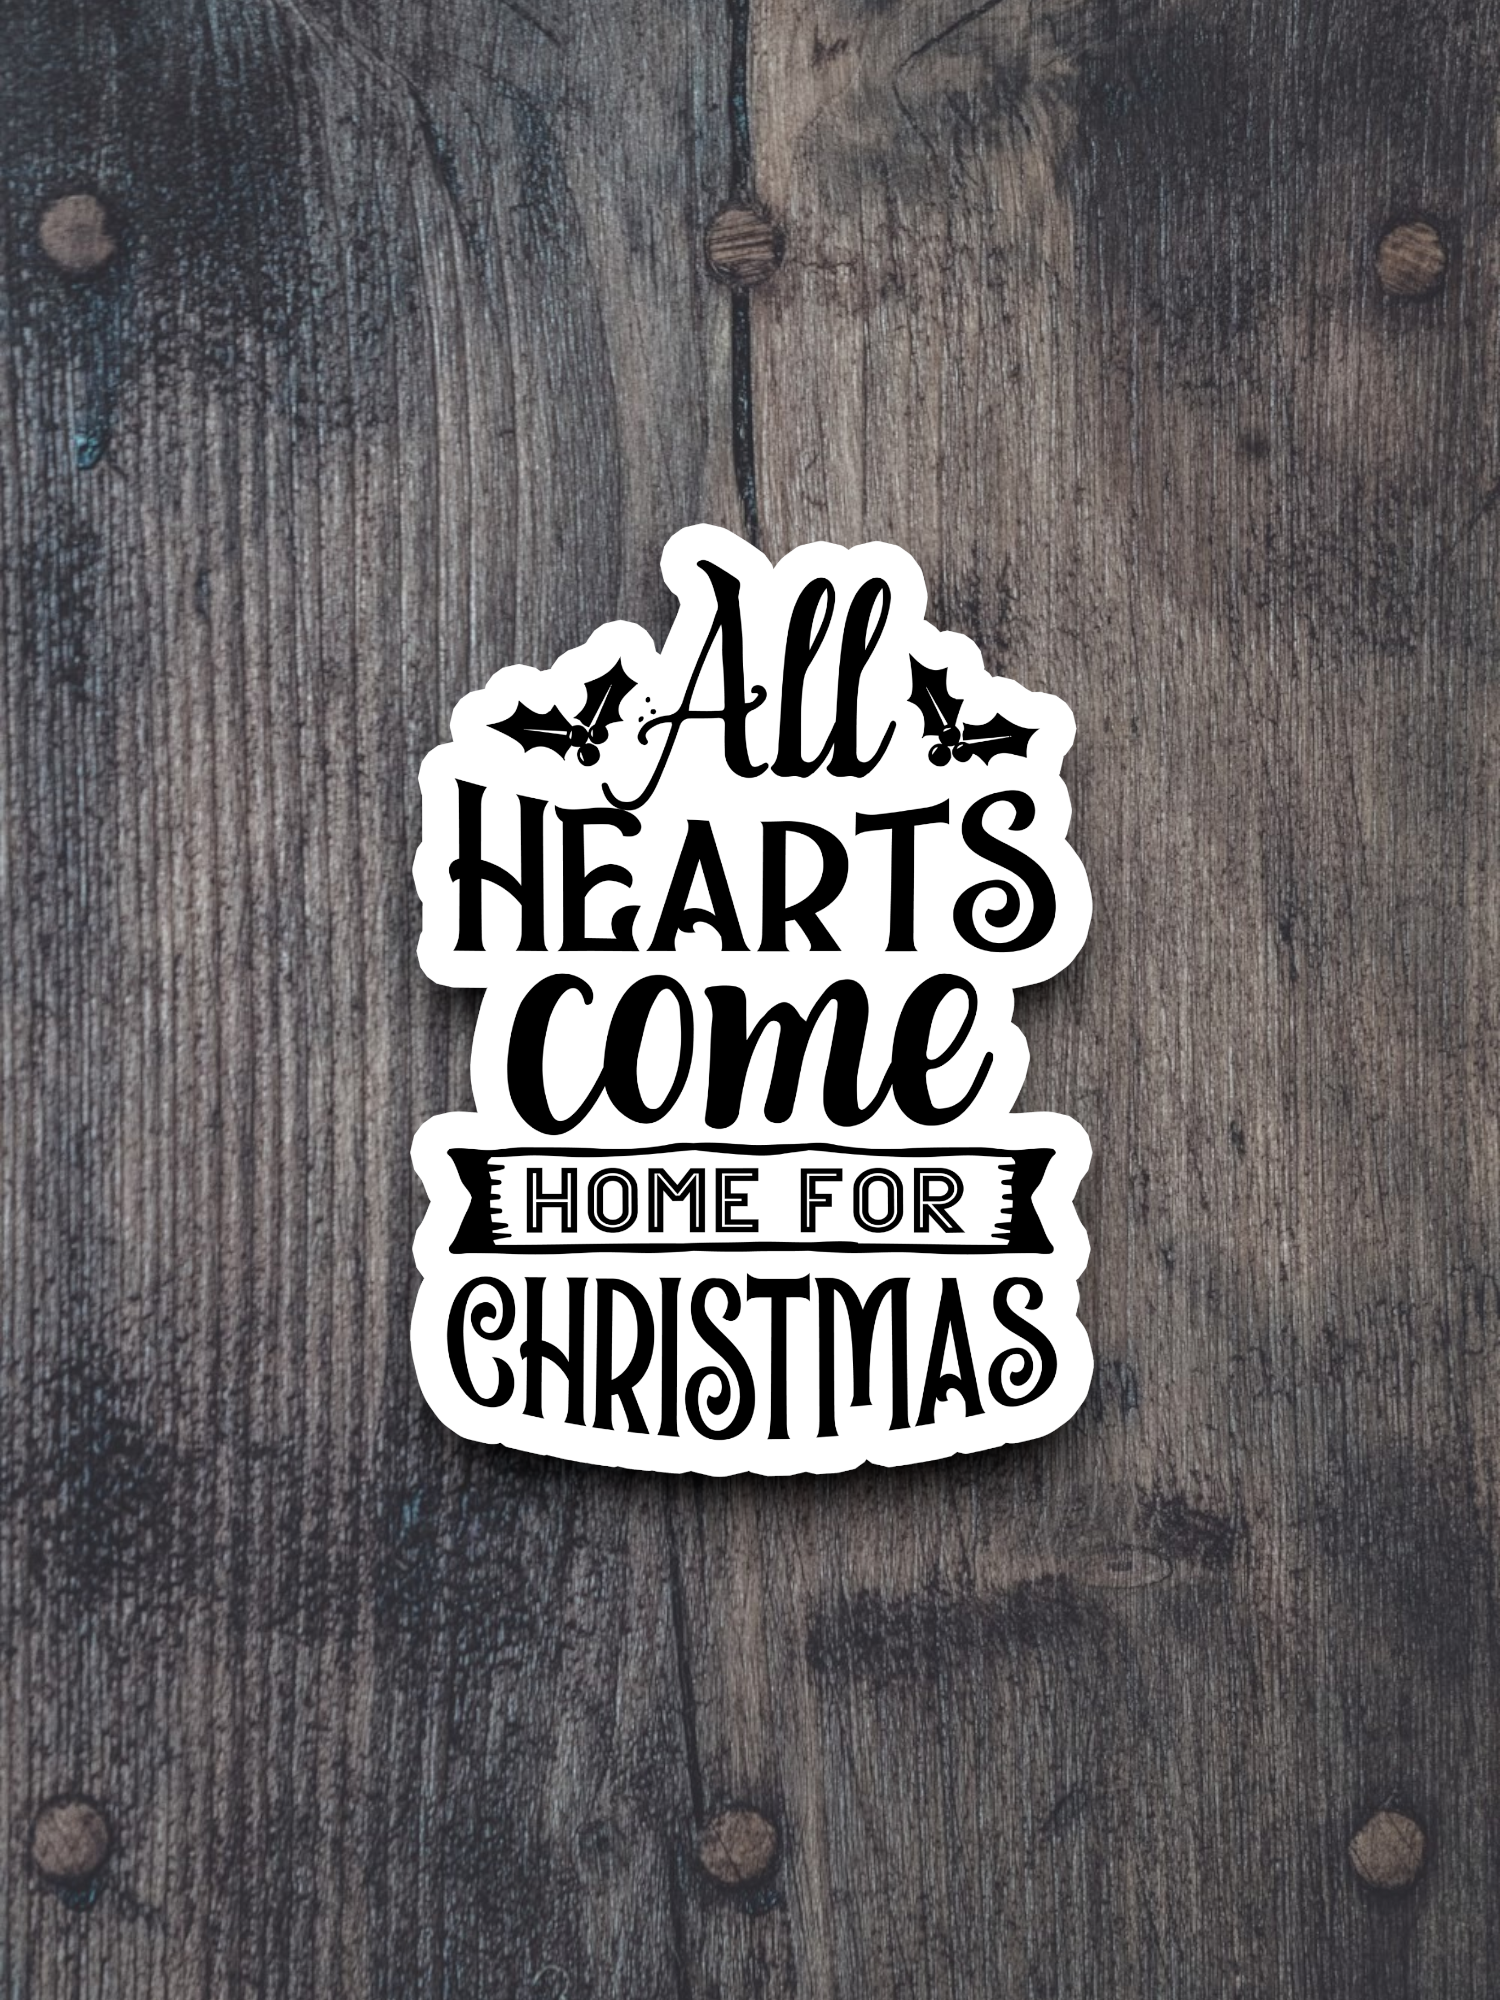 All Hearts Come Home for Christmas Version 2 - Holiday Sticker